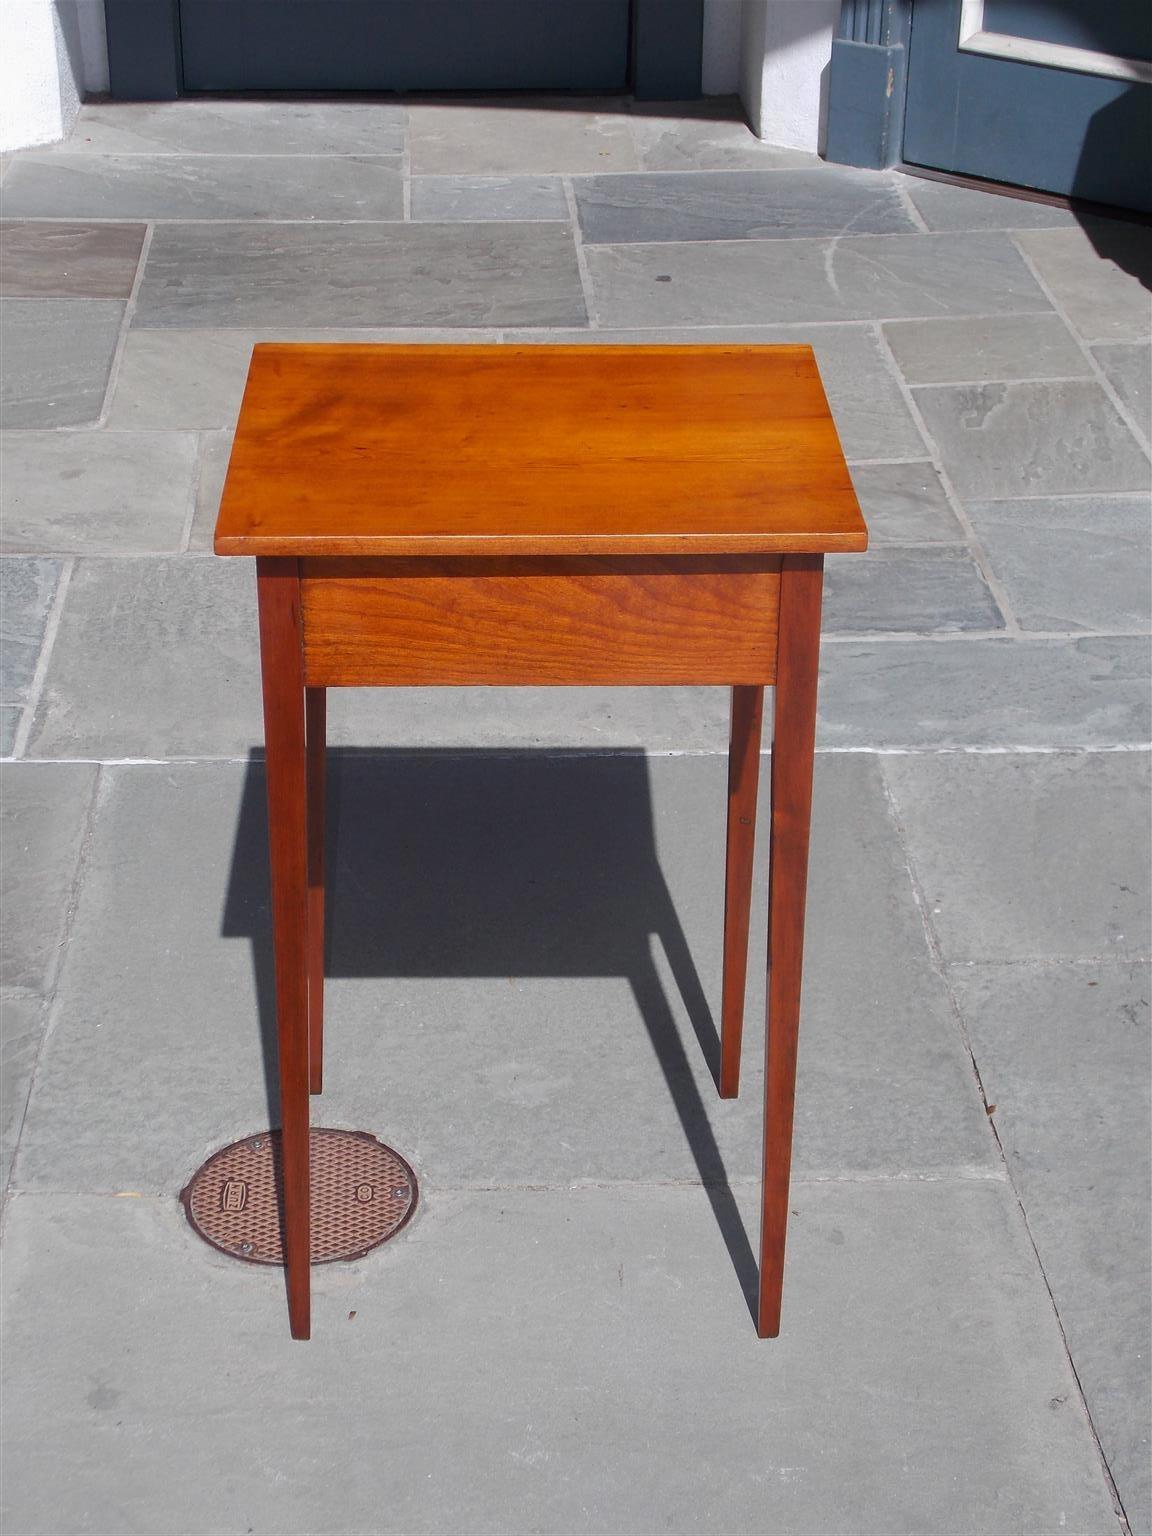 Early 19th Century American Hepplewhite Cherry Stand with Original Squared Tapered Legs, Circa 1810 For Sale